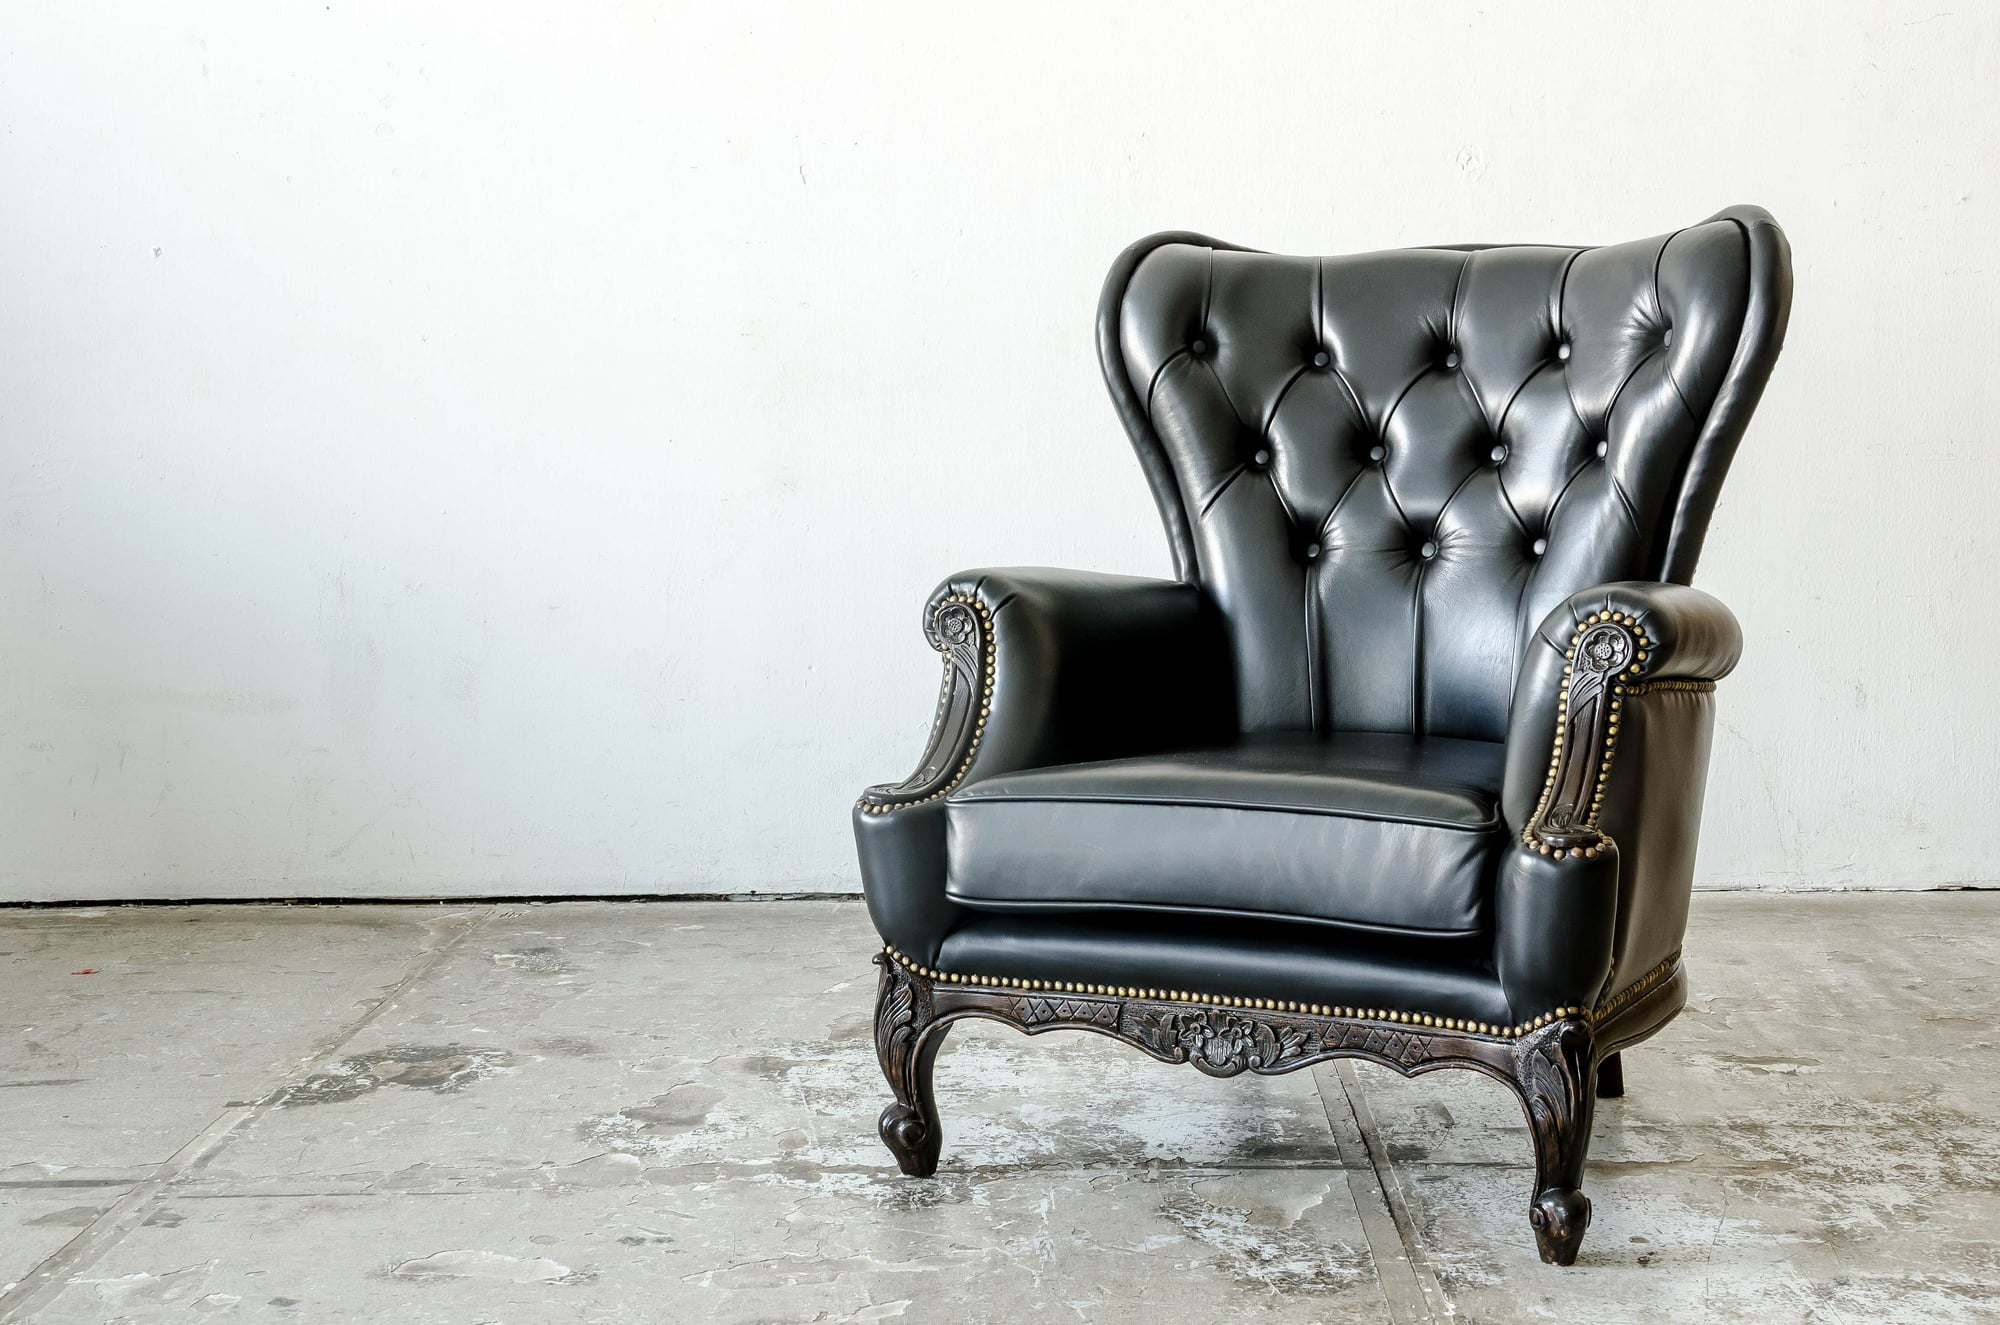 How To Reupholster A Leather Armchair, Leather To Reupholster A Chair